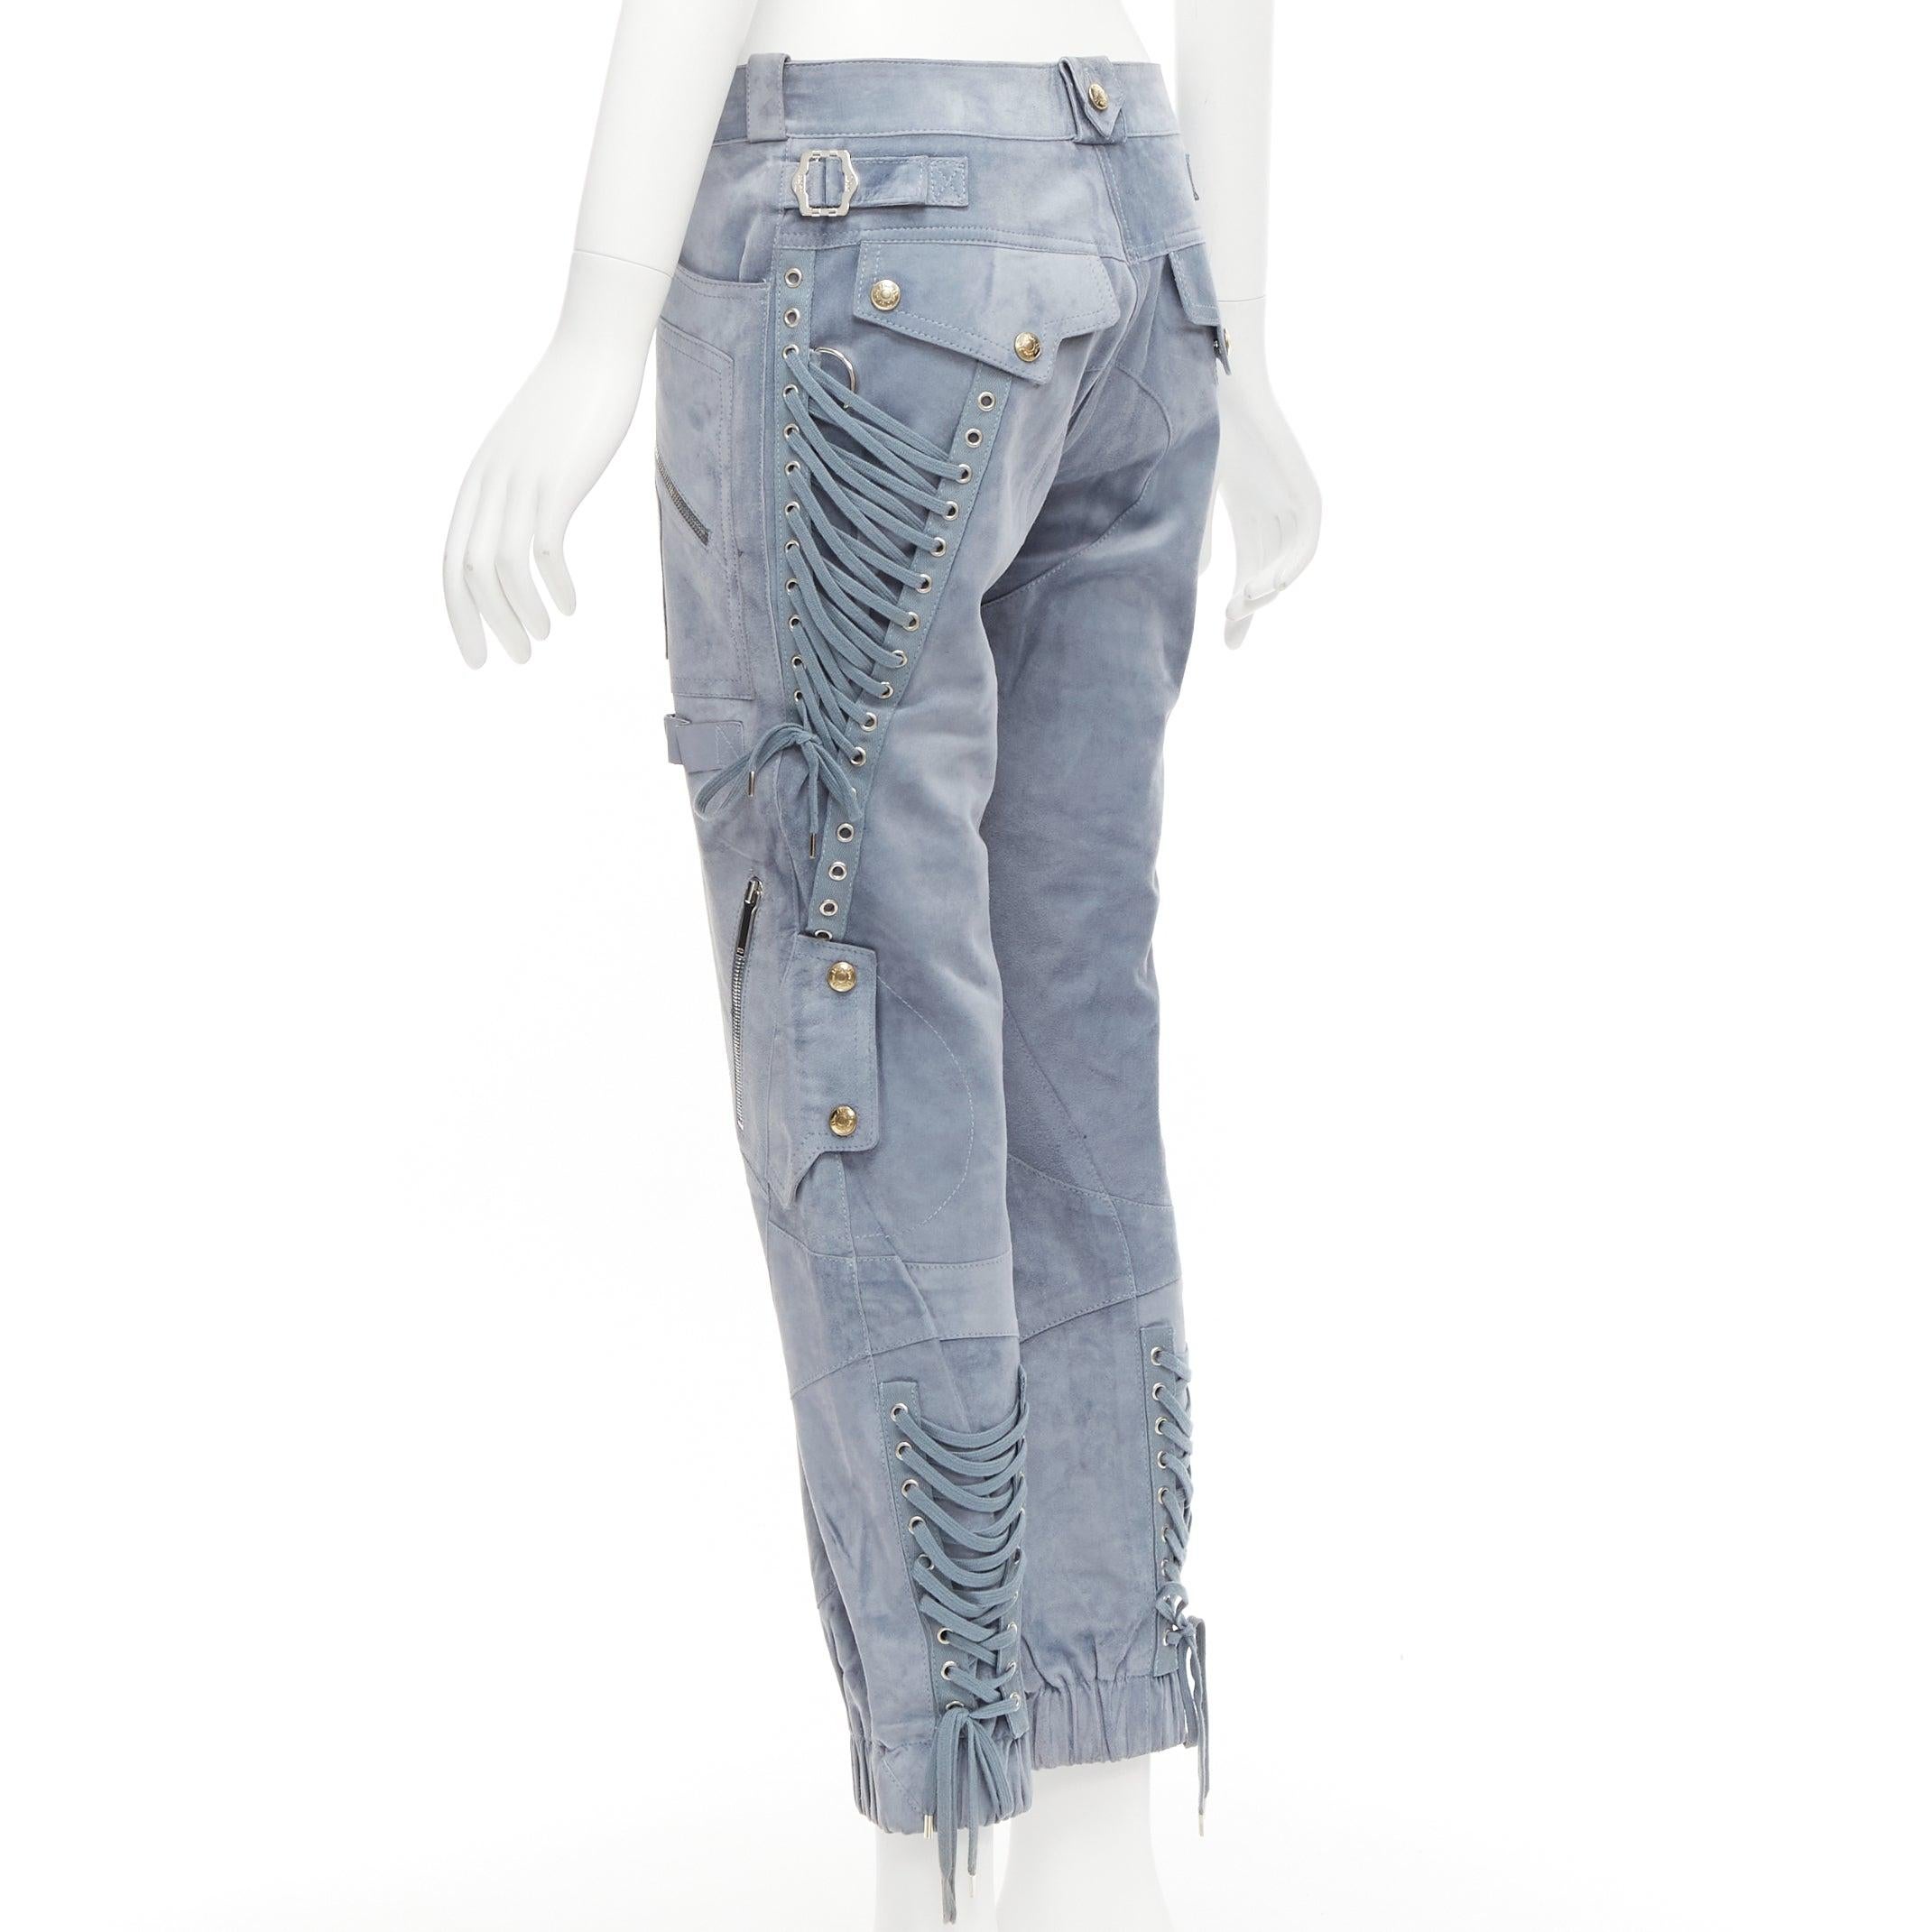 CHRISTIAN DIOR John Galliano Vintage blue calfskin laced cargo pants FR36 S
Reference: NKLL/A00061
Brand: Christian Dior
Designer: John Galliano
Material: Leather, Fabric
Color: Blue
Pattern: Solid
Closure: Zip Fly
Lining: Blue Silk
Extra Details: